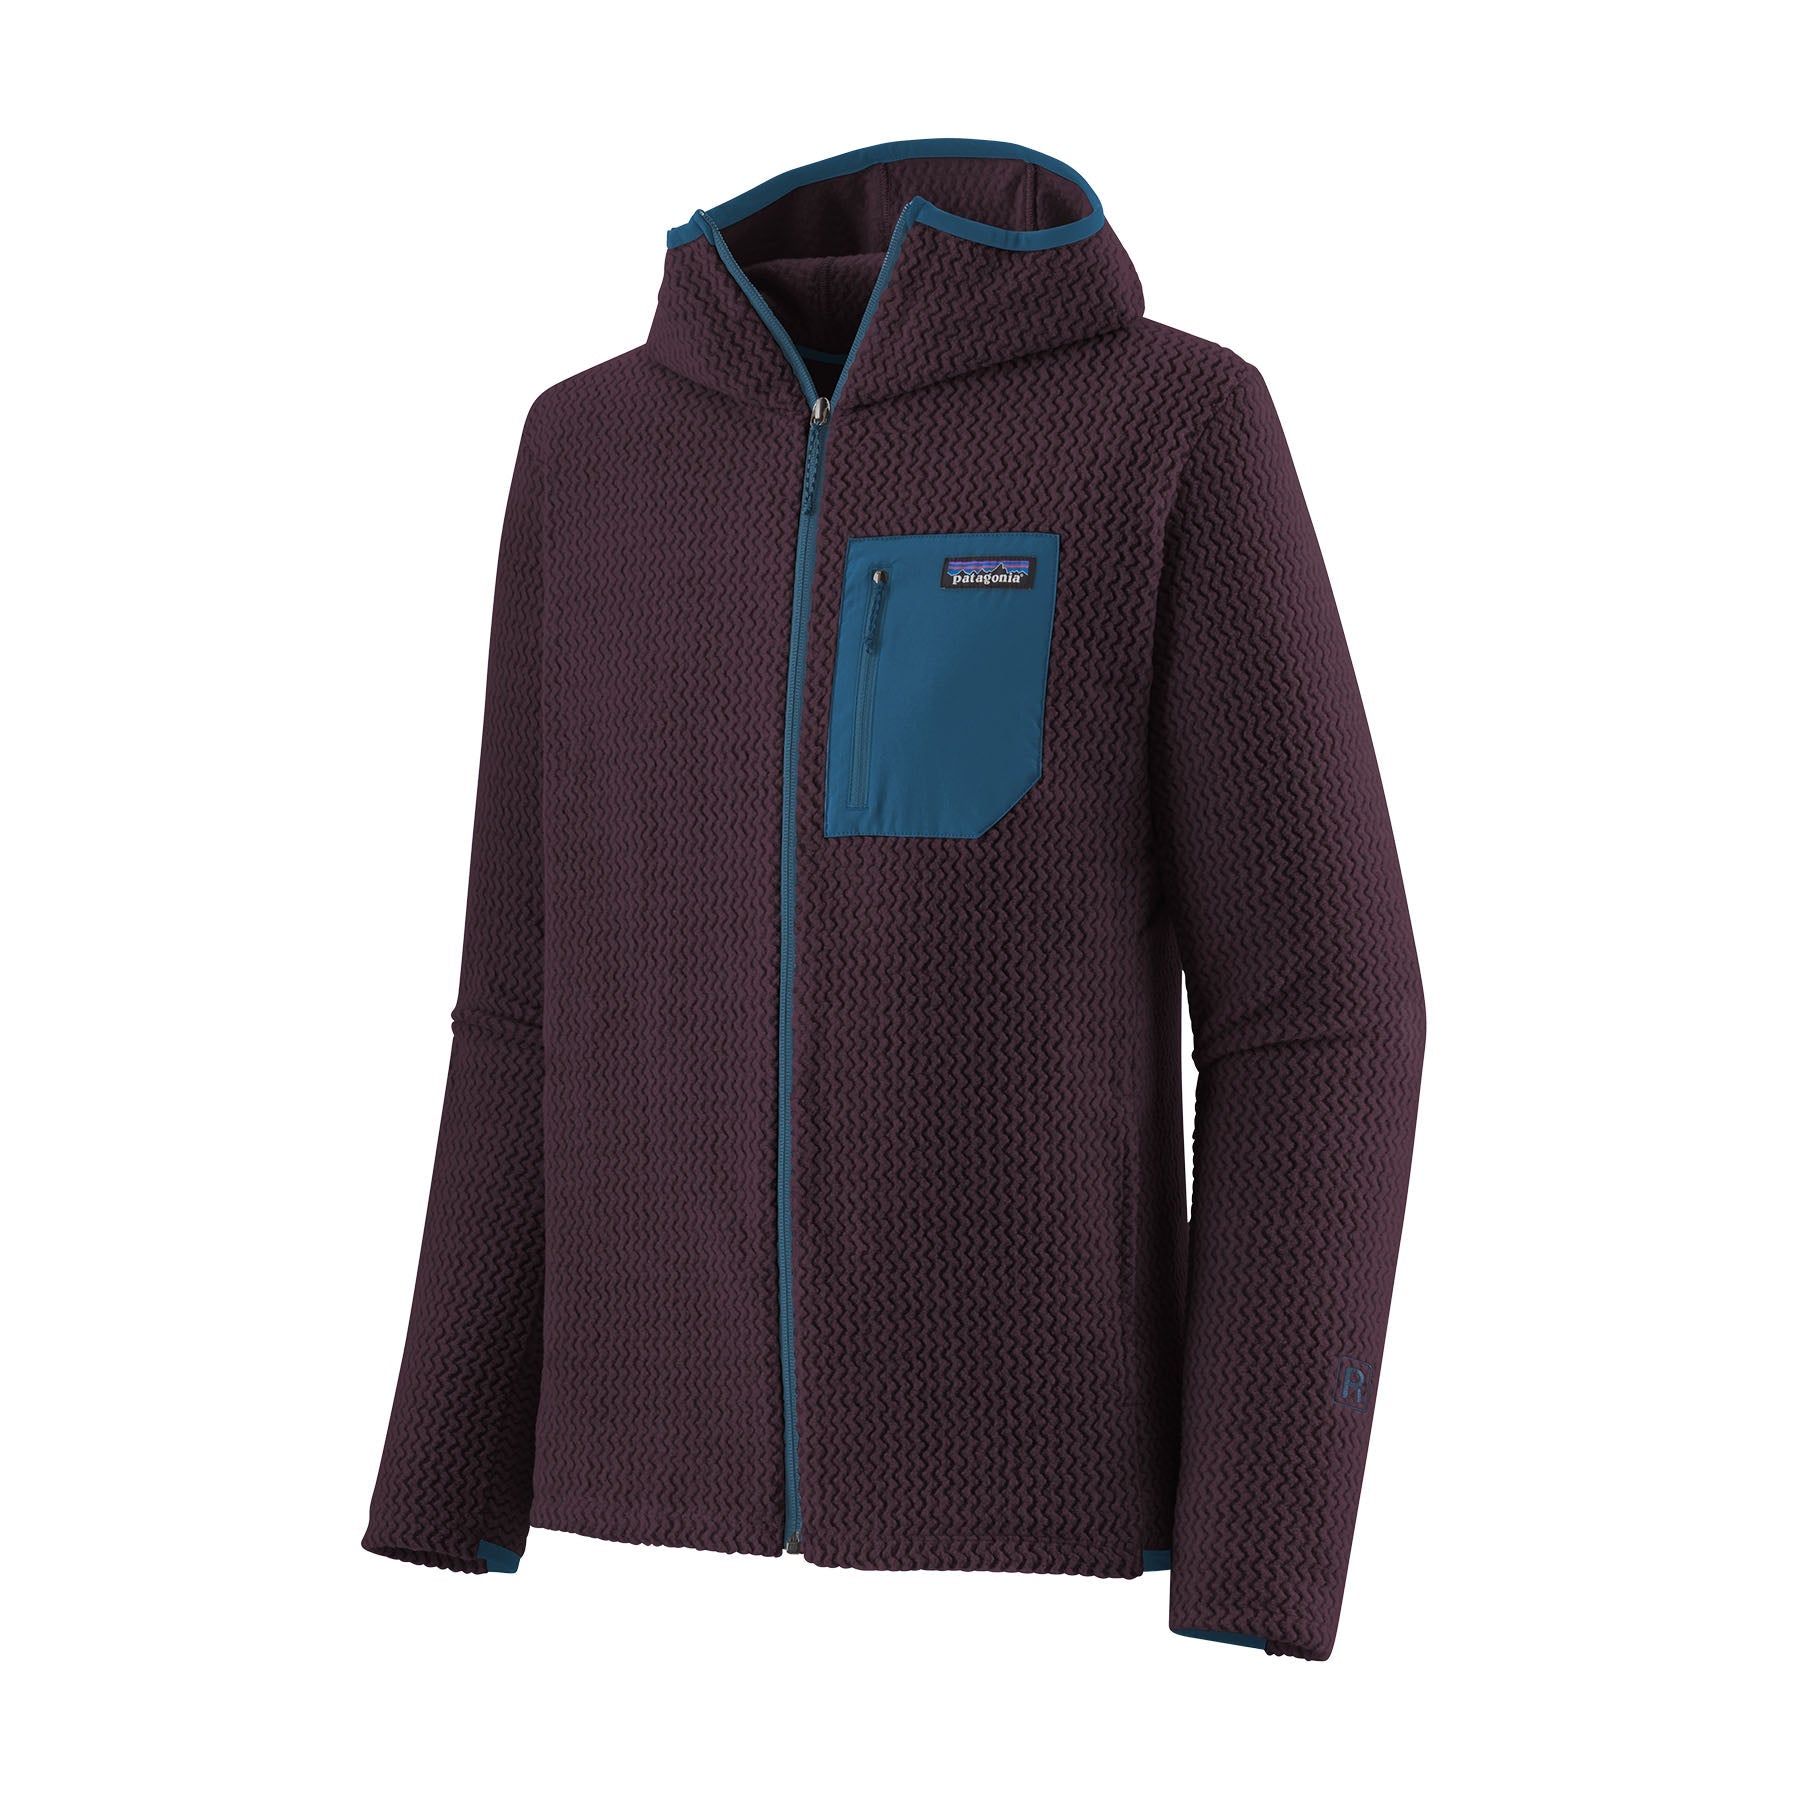 Men's Technical Fleece Jackets & Vests by Patagonia